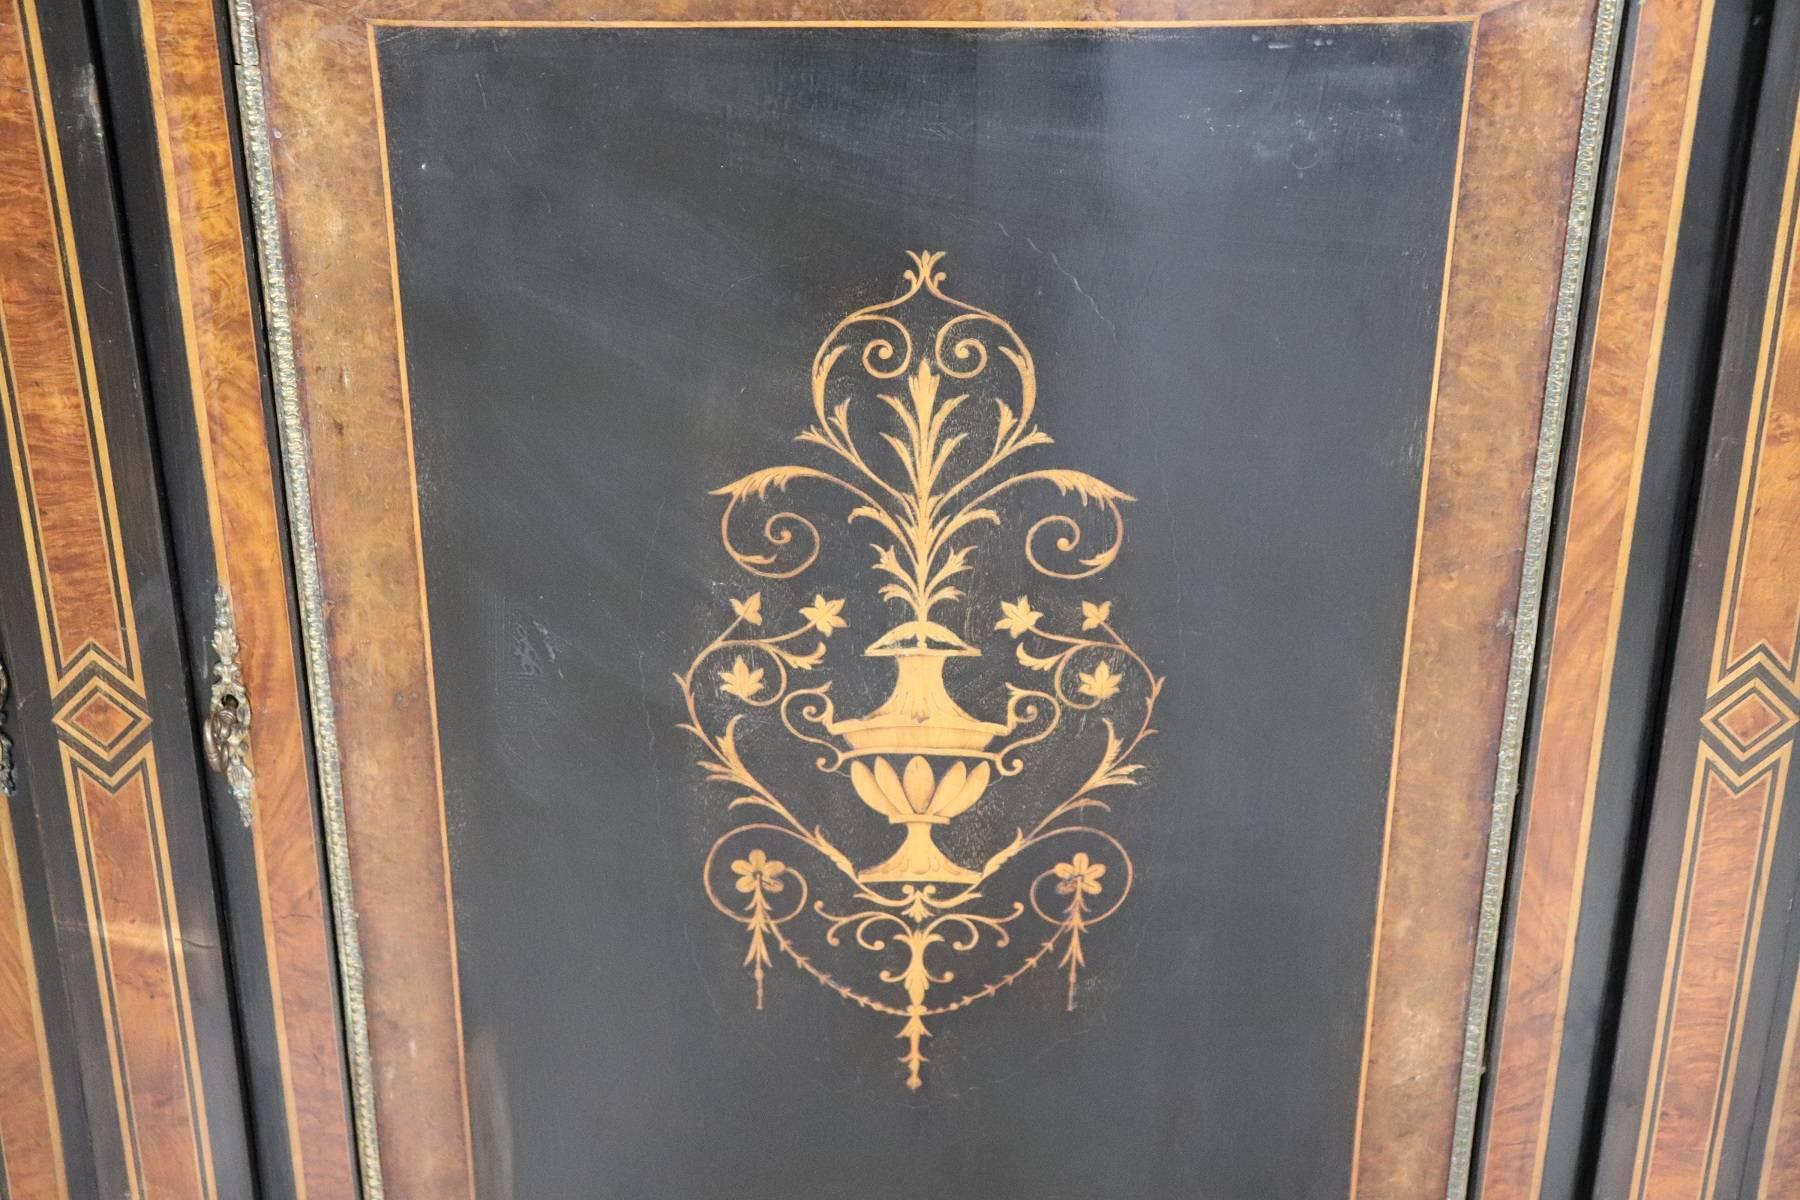 Antique ebonized and inlay French Napoleon III bombe cabinet with vetrine, circa 1860. Item features a floral decorated urn form inlaid central door.
elegant golden brass frames. Inside in the velvet-covered showcase part. Elegant cabinet!
signs